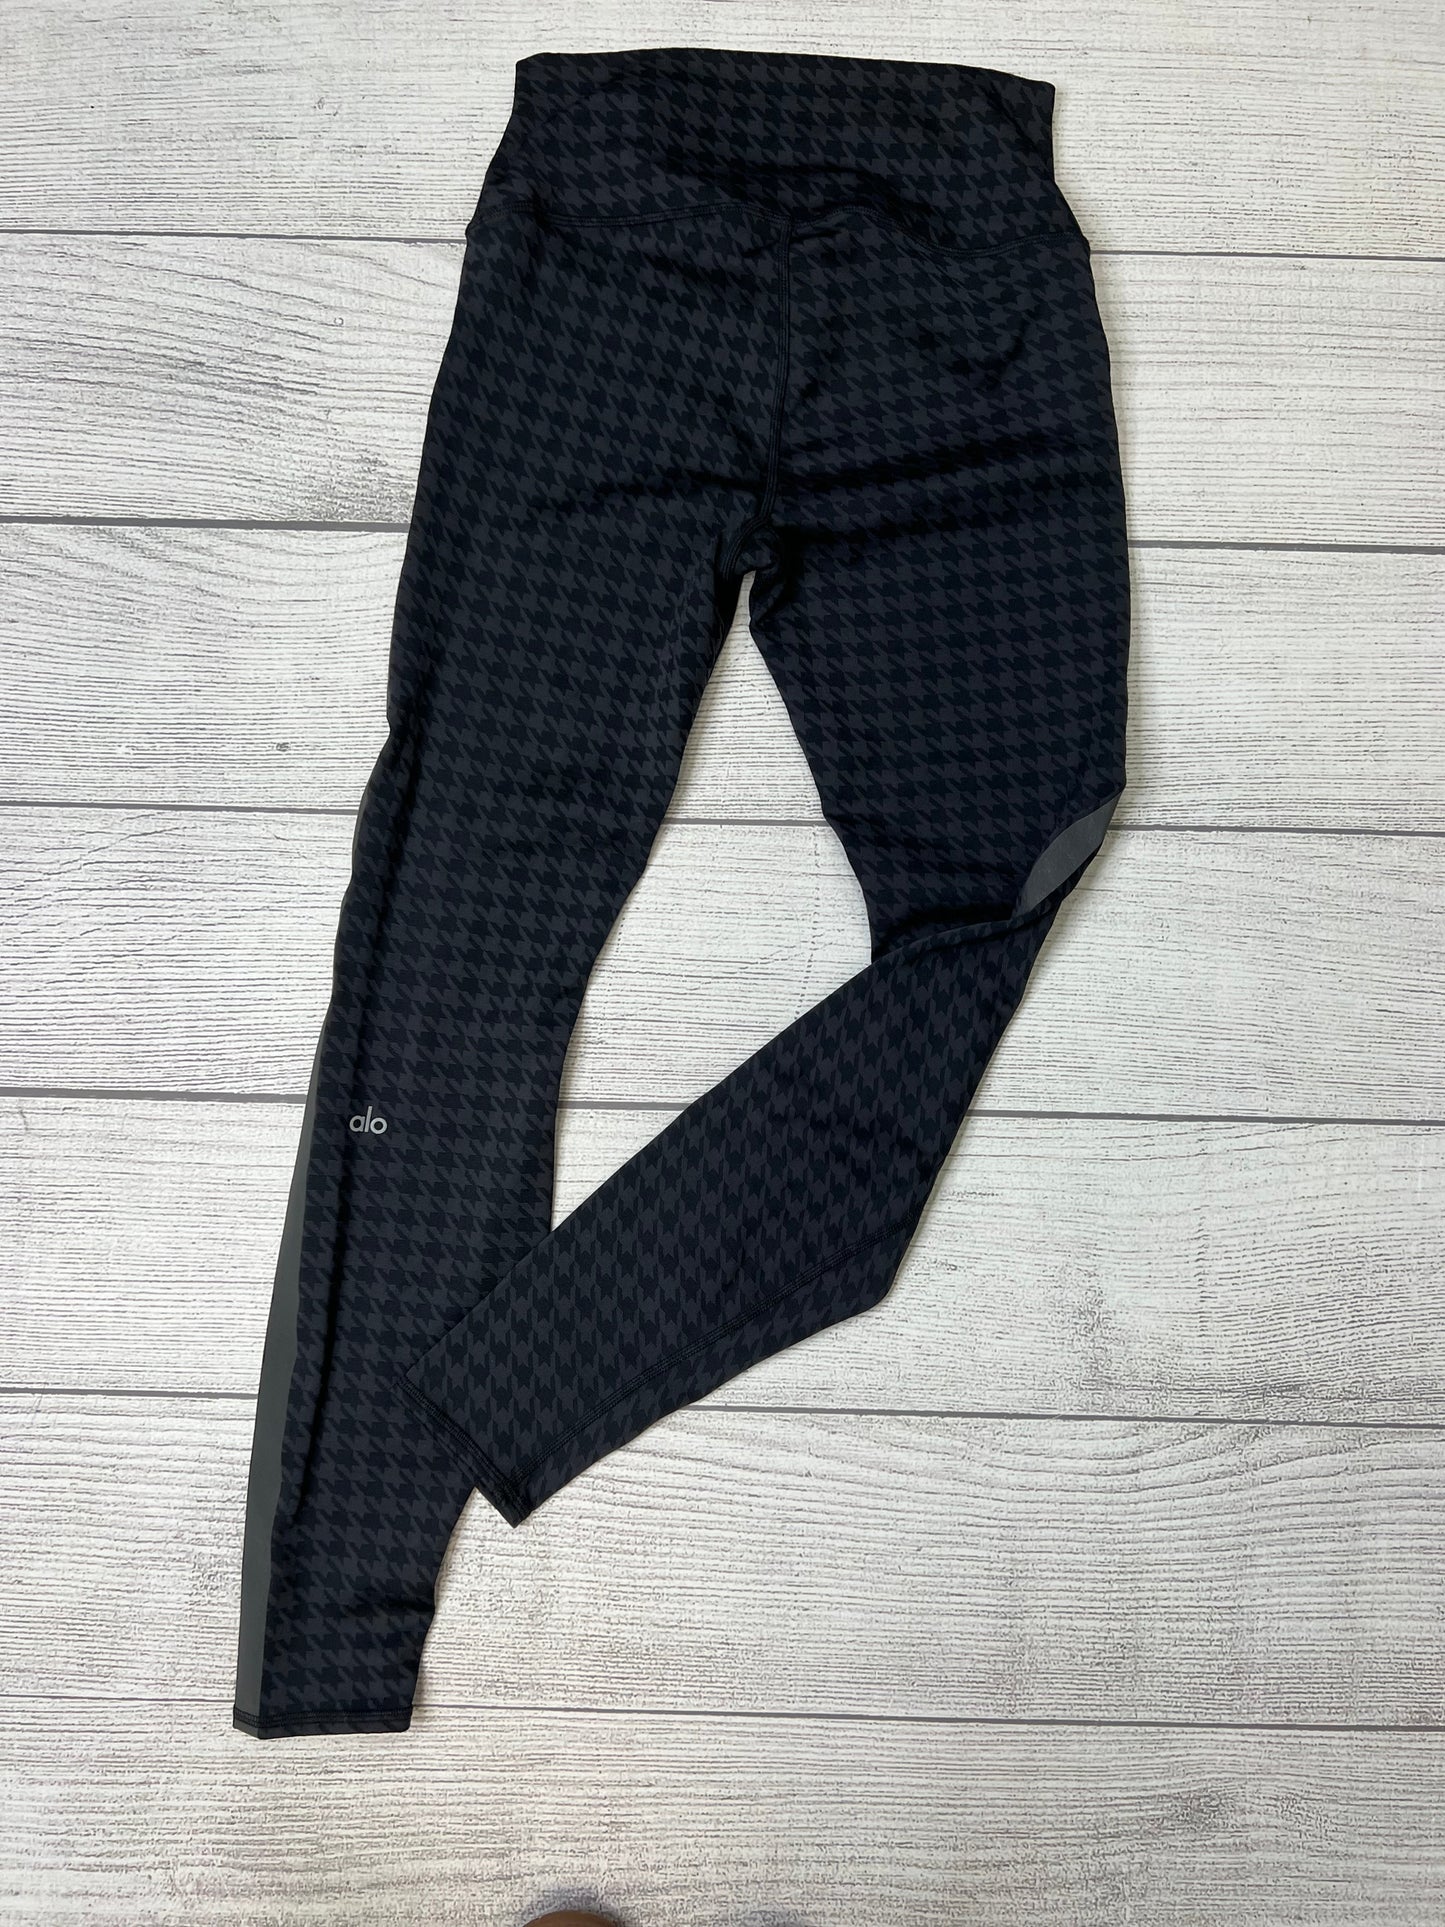 Houndstooth Athletic Leggings Alo, Size L